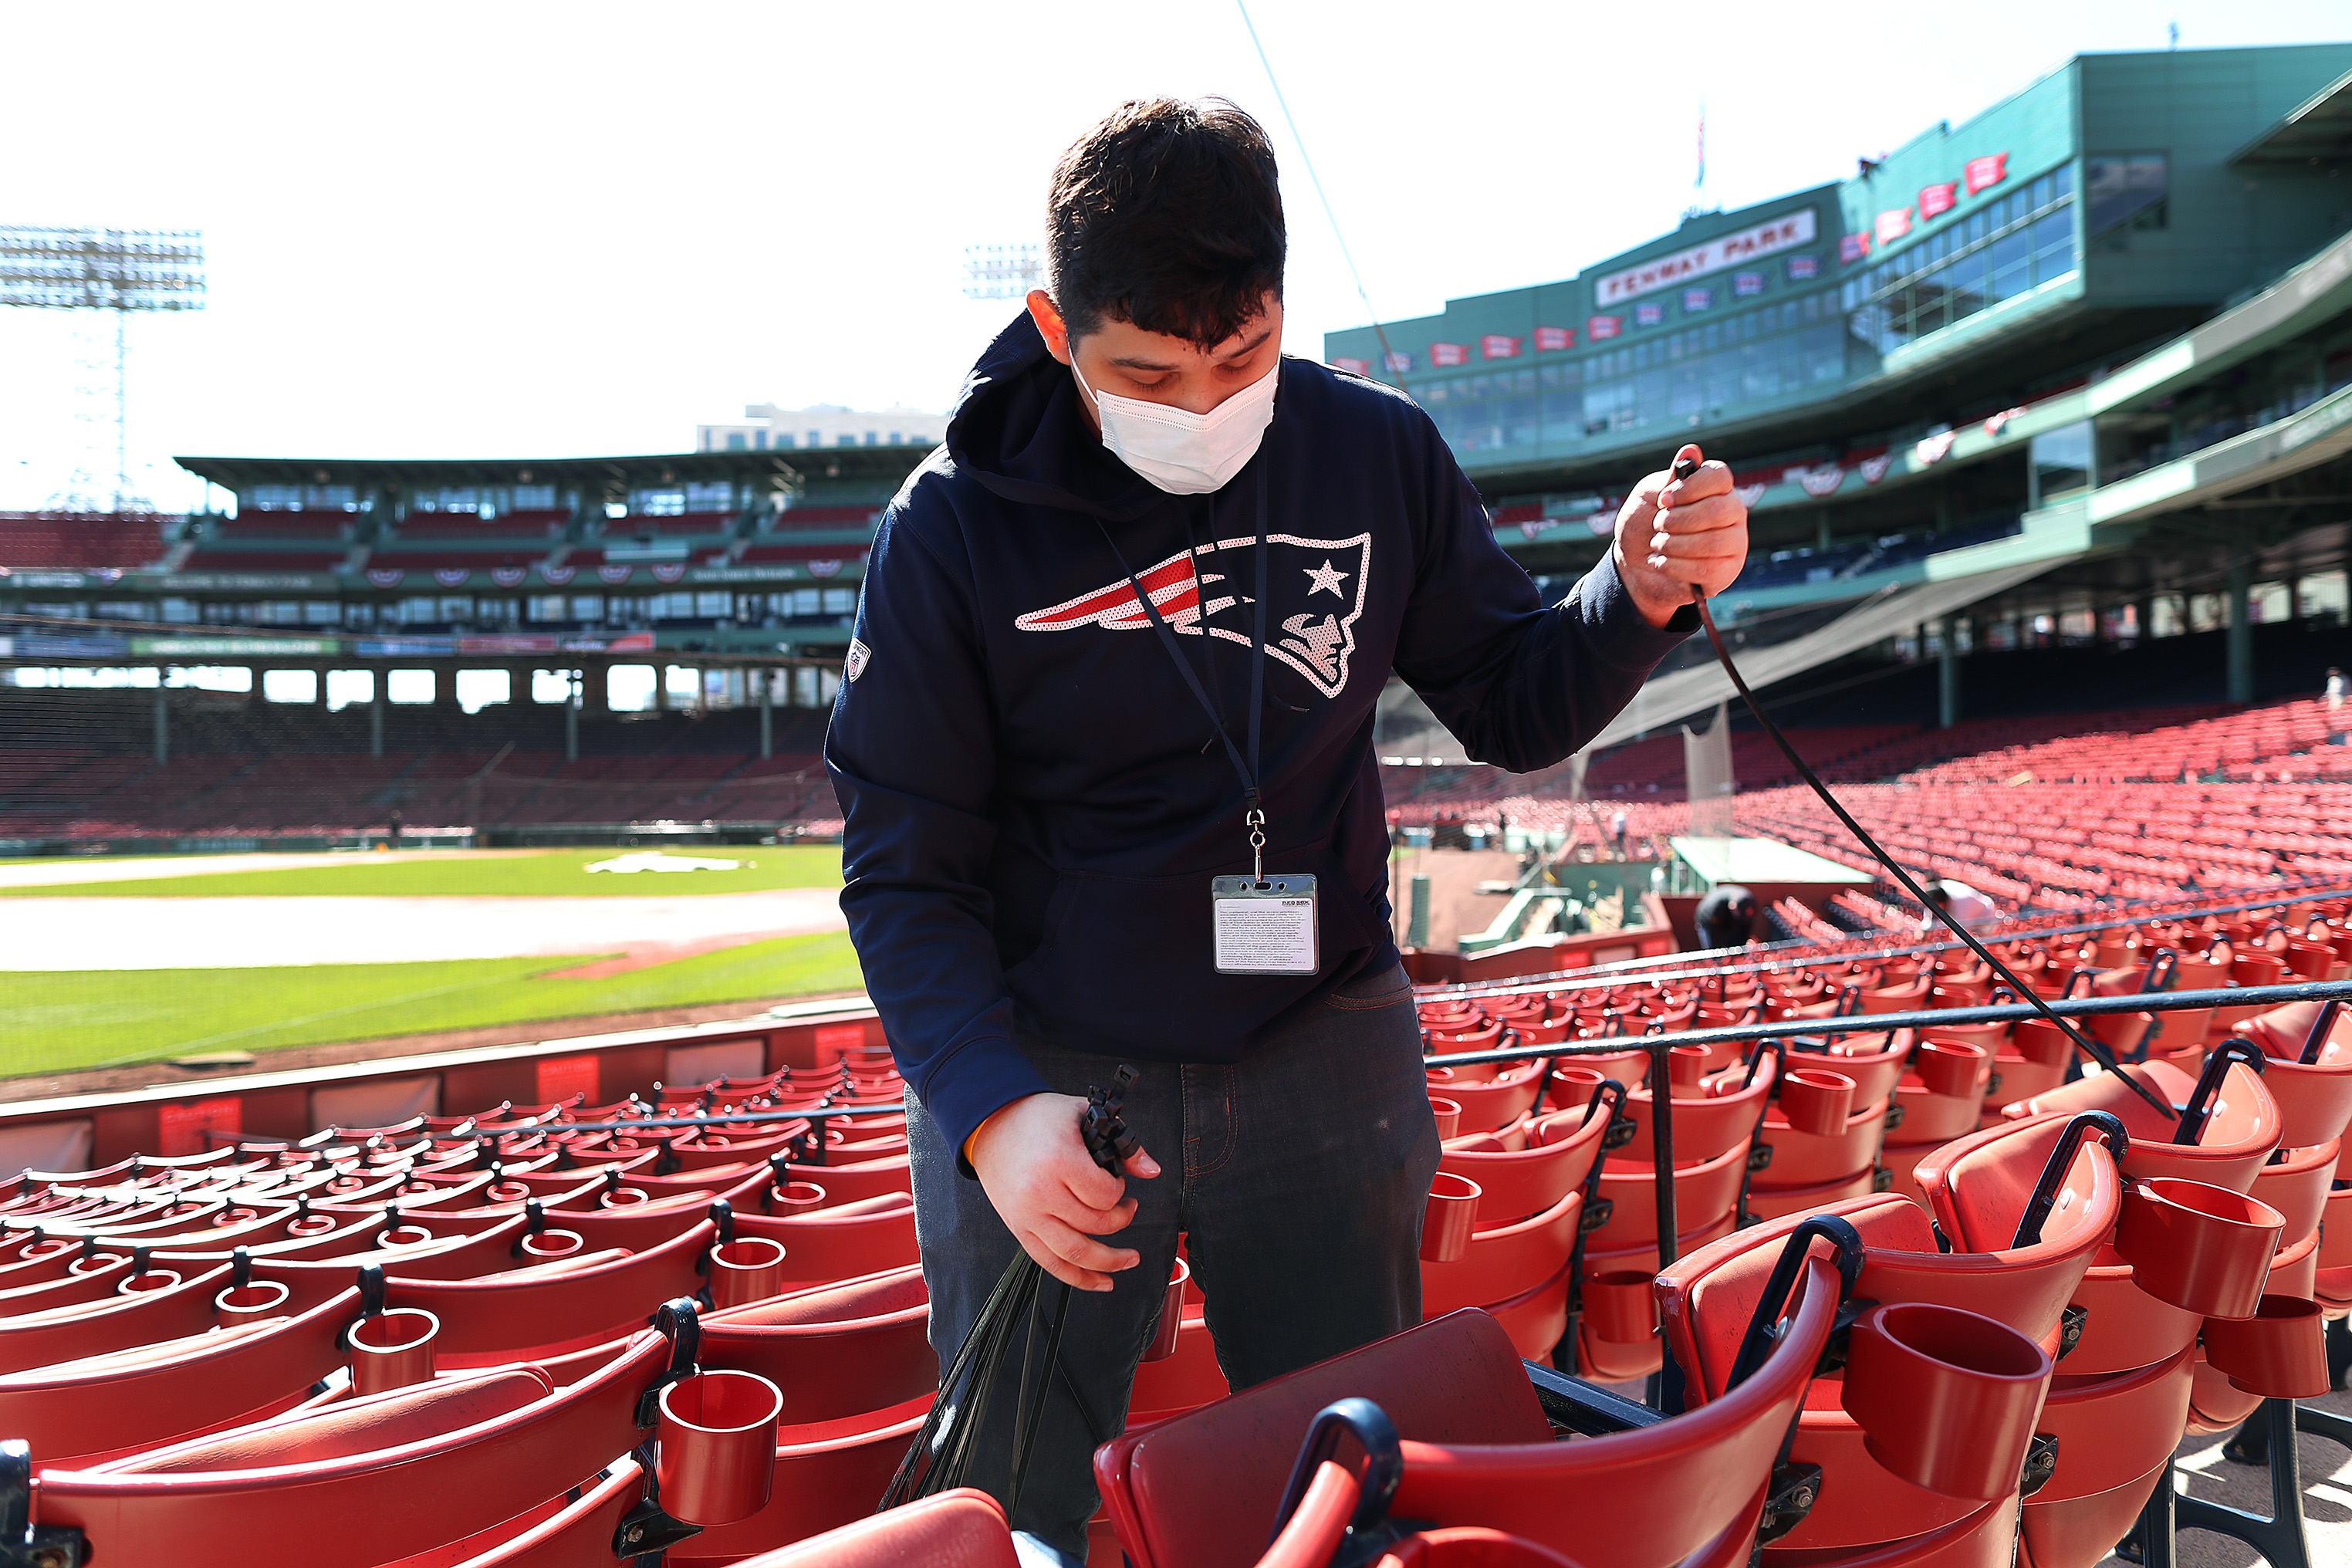 Crews put on finishing touches ahead of Opening Day at Fenway Park 